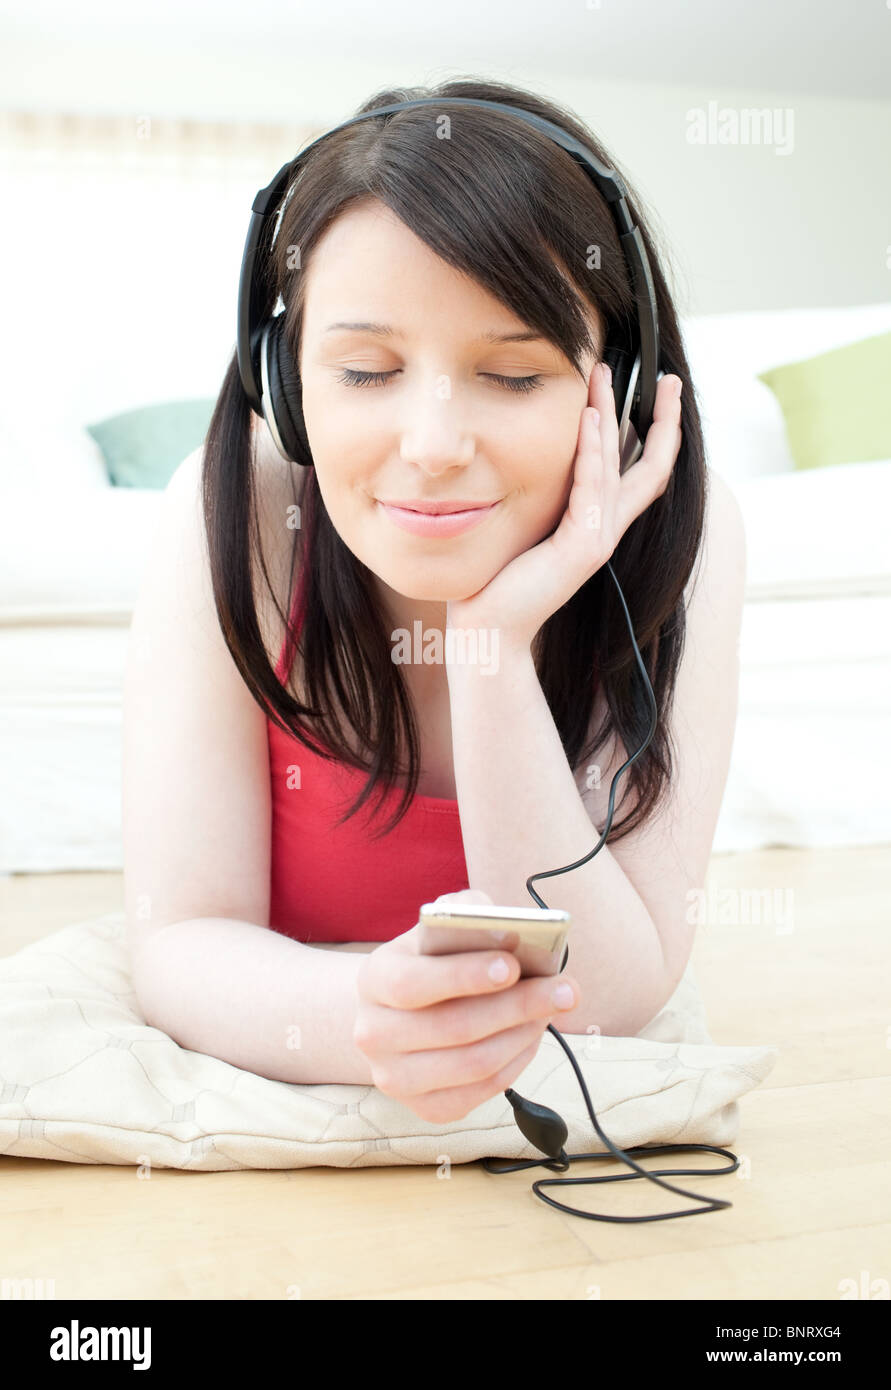 Relaxed woman listening music with headphones on Stock Photo